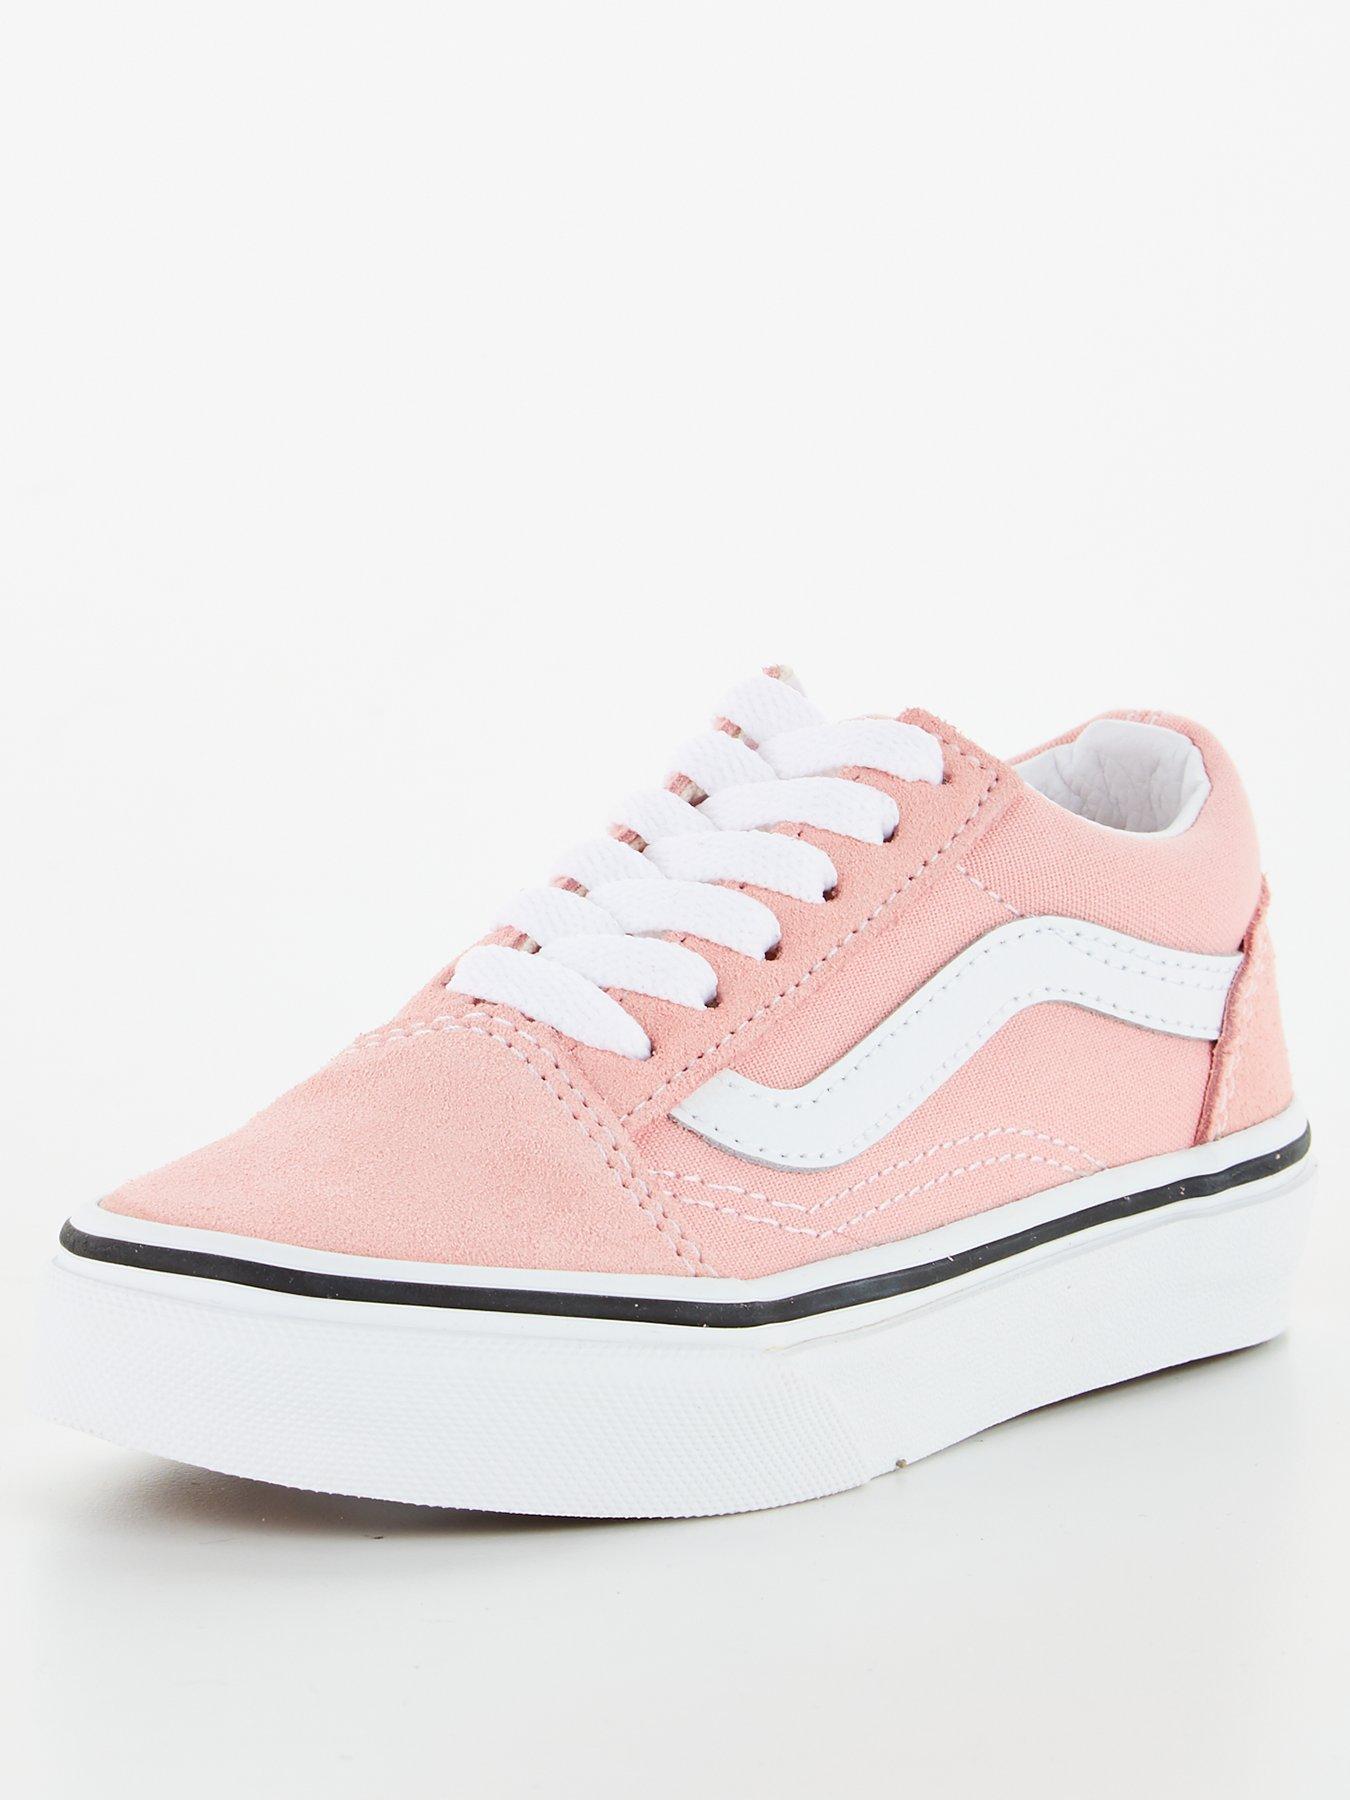 vans for girls with price